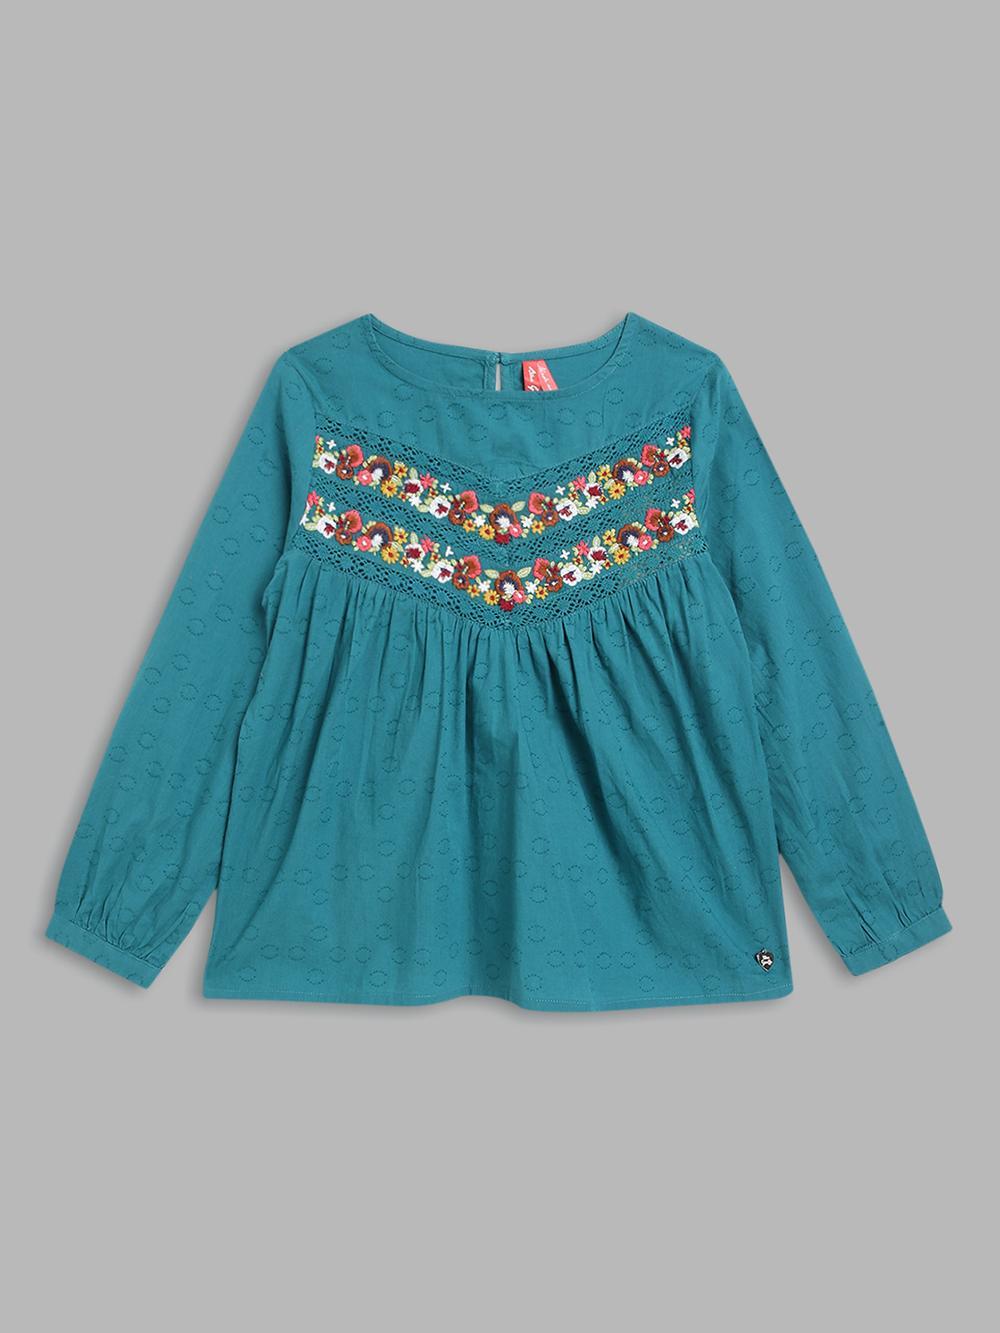 teal embroidered round neck top